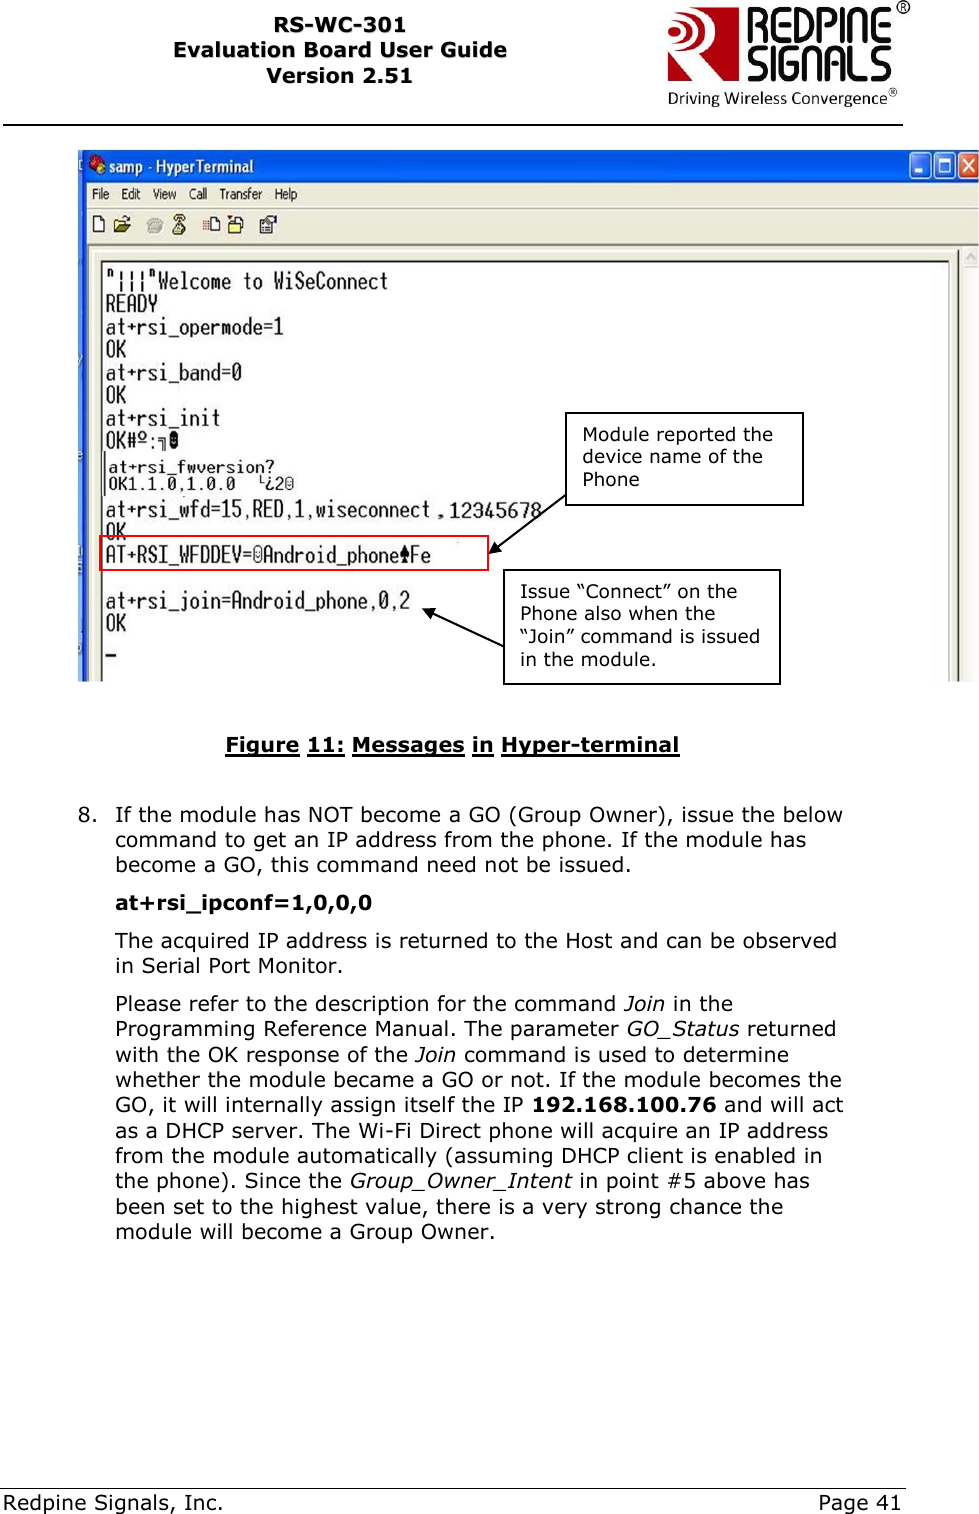     Redpine Signals, Inc.     Page 41 RRSS--WWCC--330011    EEvvaalluuaattiioonn  BBooaarrdd  UUsseerr  GGuuiiddee  VVeerrssiioonn  22..5511      Figure 11: Messages in Hyper-terminal  8. If the module has NOT become a GO (Group Owner), issue the below command to get an IP address from the phone. If the module has become a GO, this command need not be issued.  at+rsi_ipconf=1,0,0,0 The acquired IP address is returned to the Host and can be observed in Serial Port Monitor.  Please refer to the description for the command Join in the Programming Reference Manual. The parameter GO_Status returned with the OK response of the Join command is used to determine whether the module became a GO or not. If the module becomes the GO, it will internally assign itself the IP 192.168.100.76 and will act as a DHCP server. The Wi-Fi Direct phone will acquire an IP address from the module automatically (assuming DHCP client is enabled in the phone). Since the Group_Owner_Intent in point #5 above has been set to the highest value, there is a very strong chance the module will become a Group Owner.  Issue “Connect” on the Phone also when the “Join” command is issued in the module. Module reported the device name of the Phone 